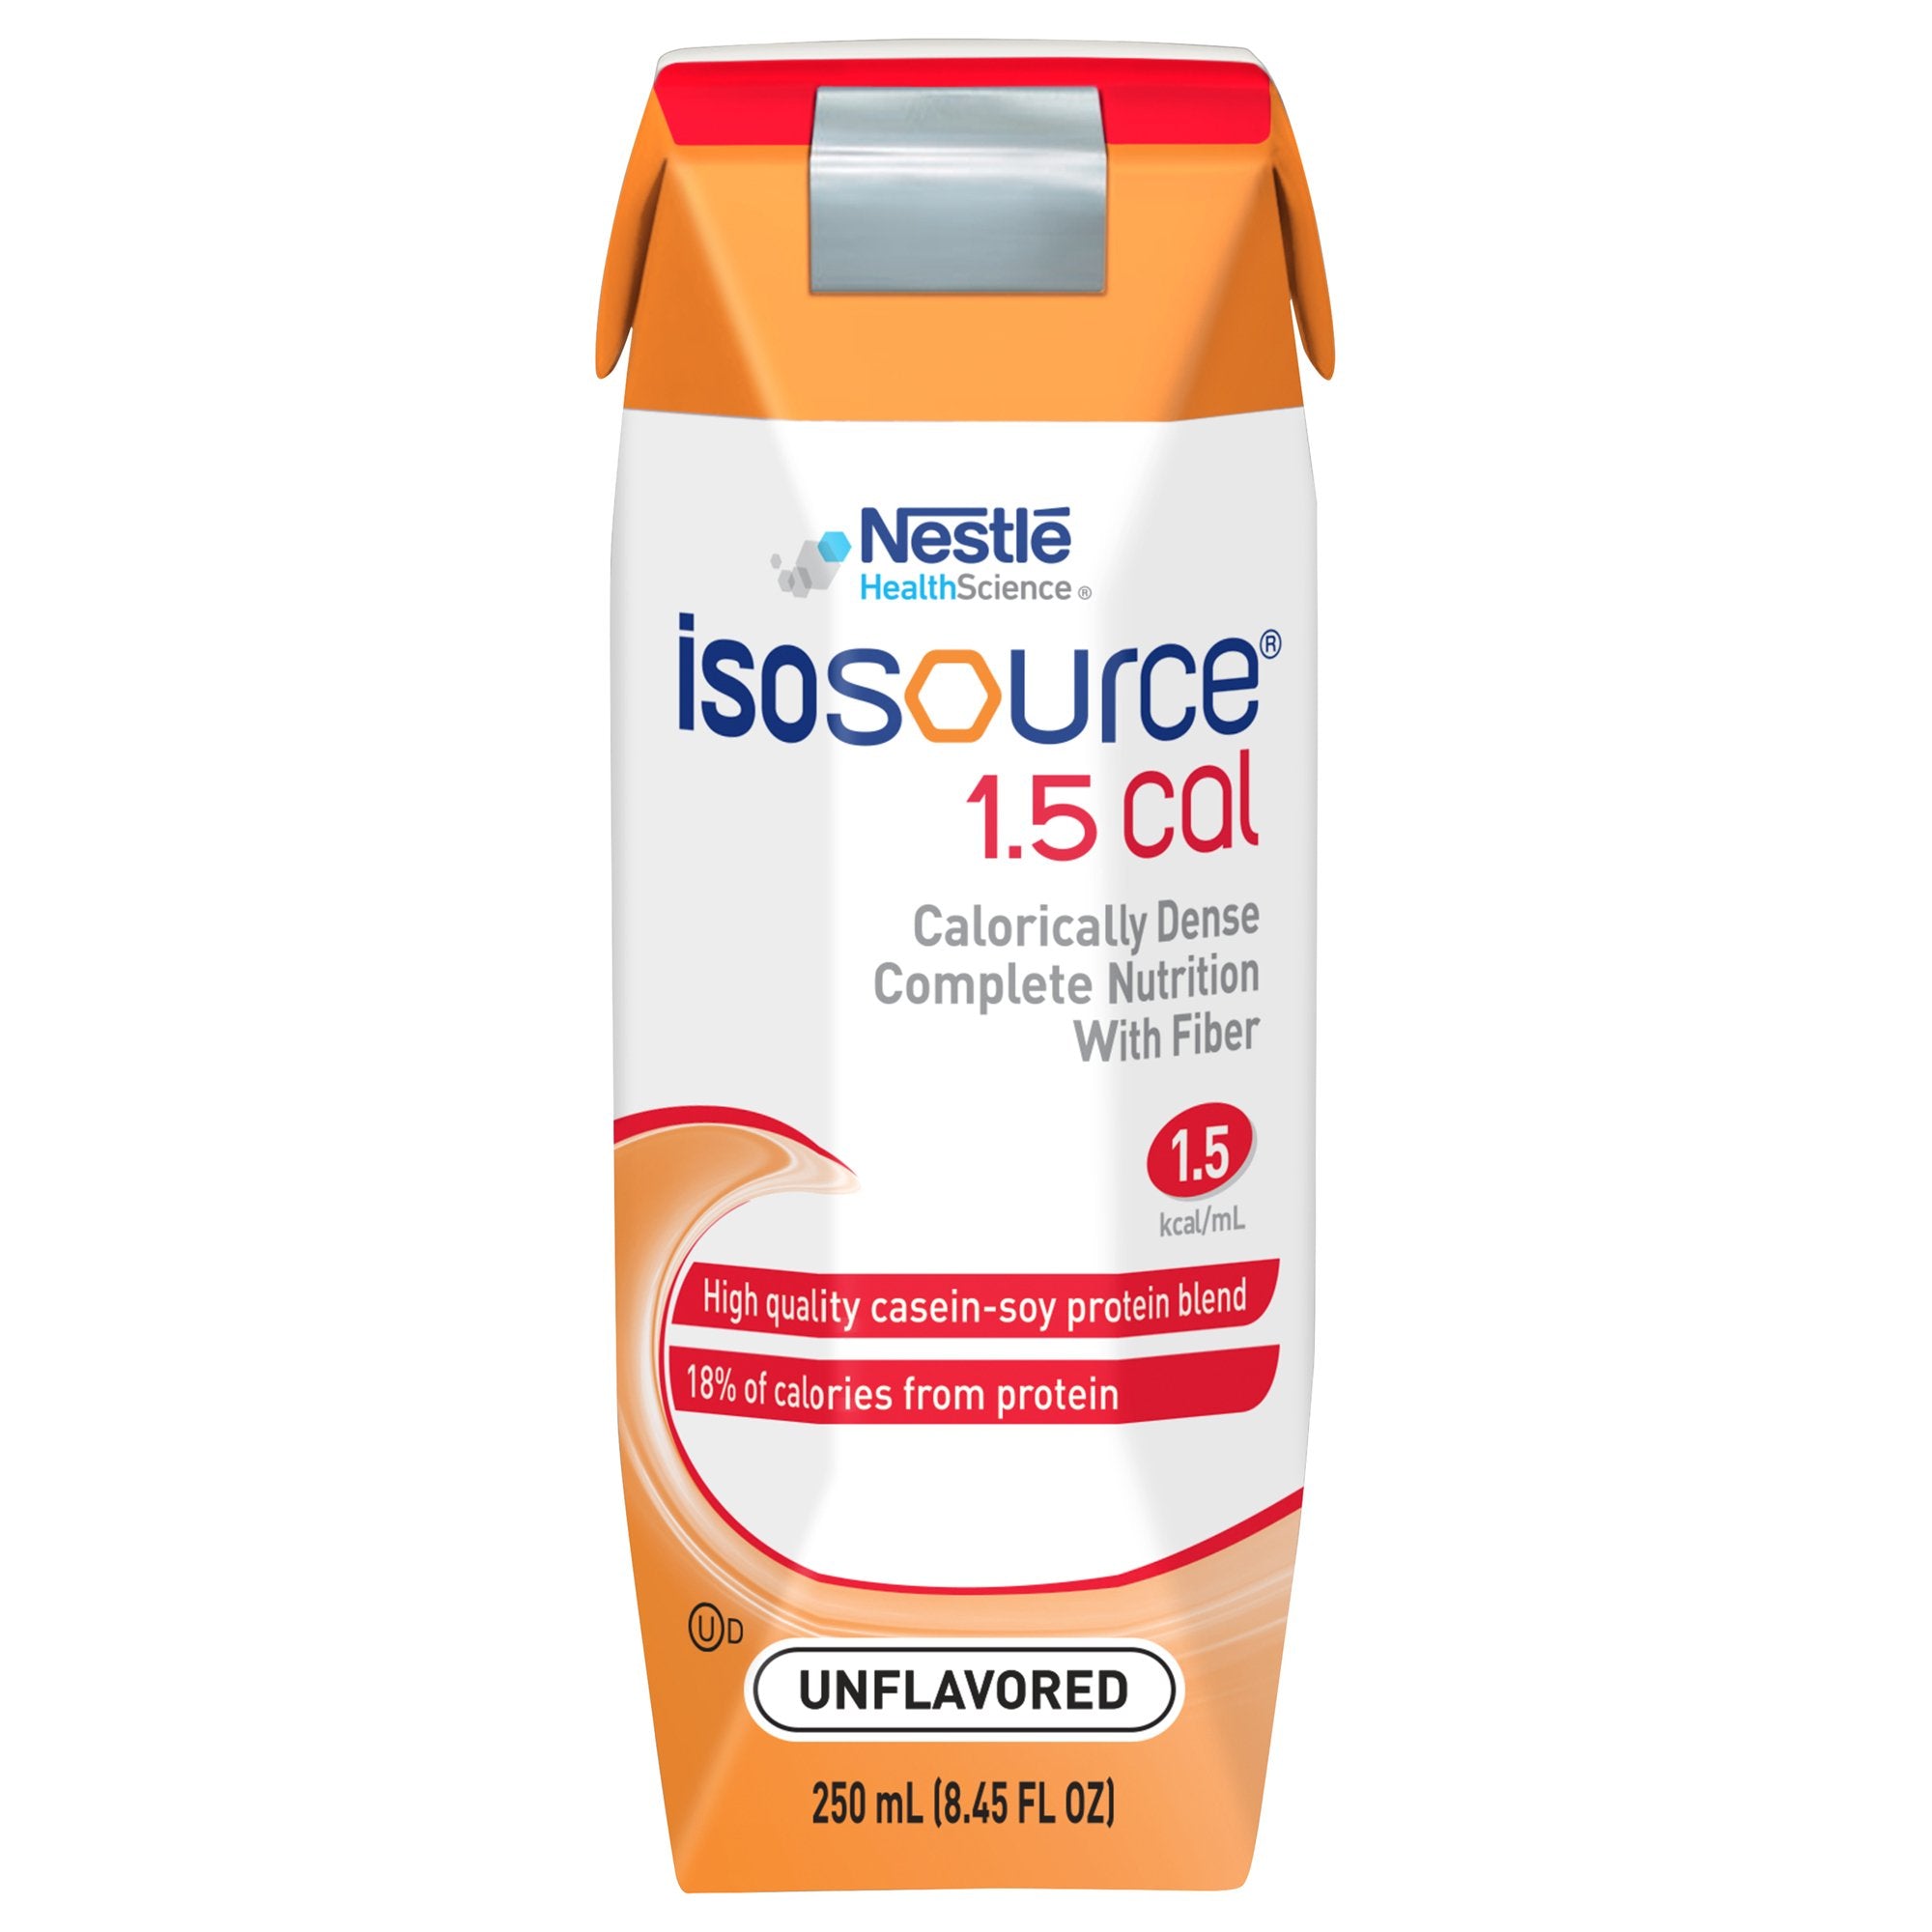 Isosource® 1.5 Cal 250ml Carton. Unflavored